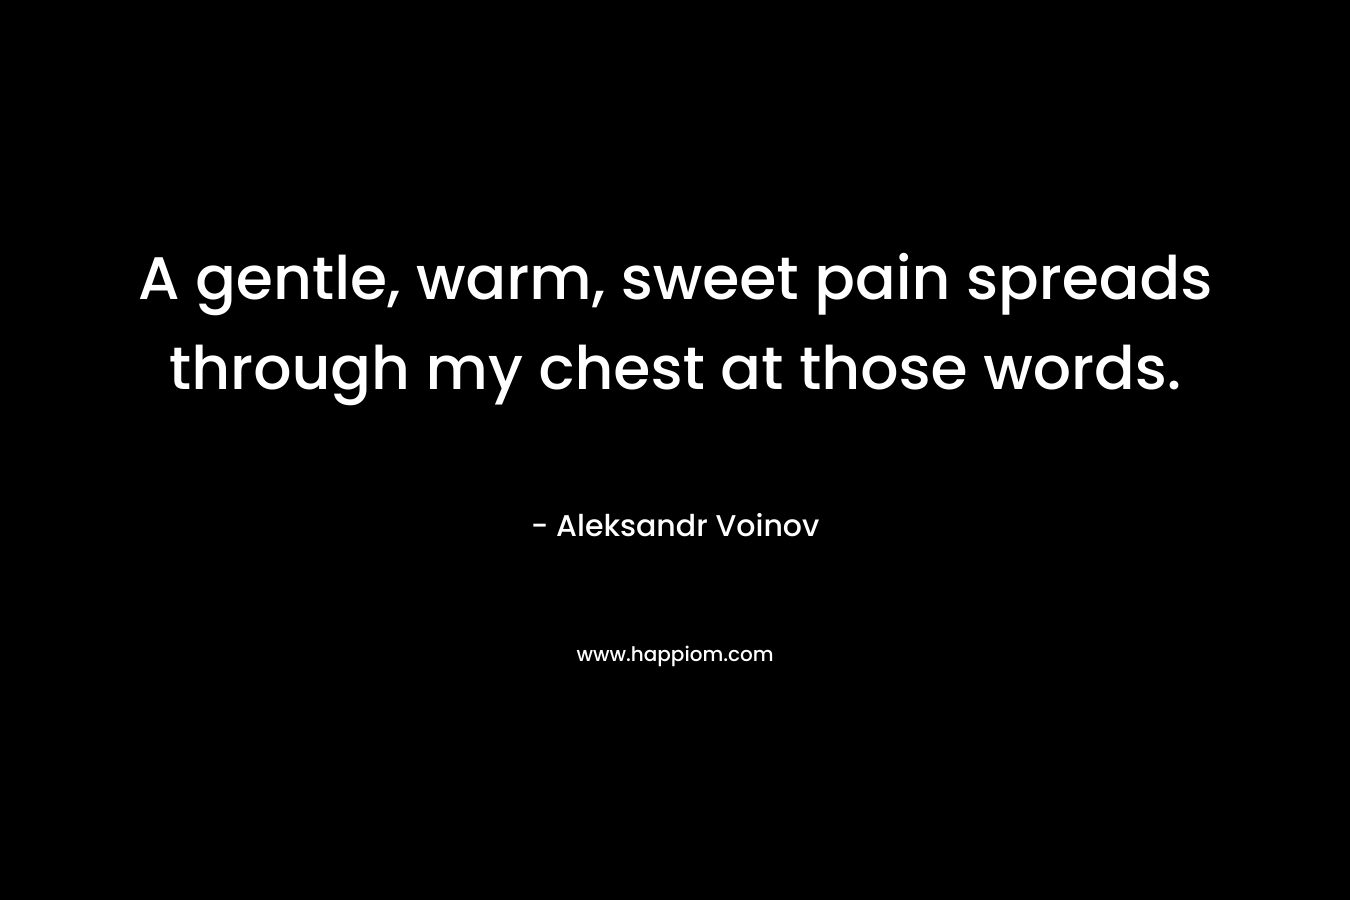 A gentle, warm, sweet pain spreads through my chest at those words. – Aleksandr Voinov